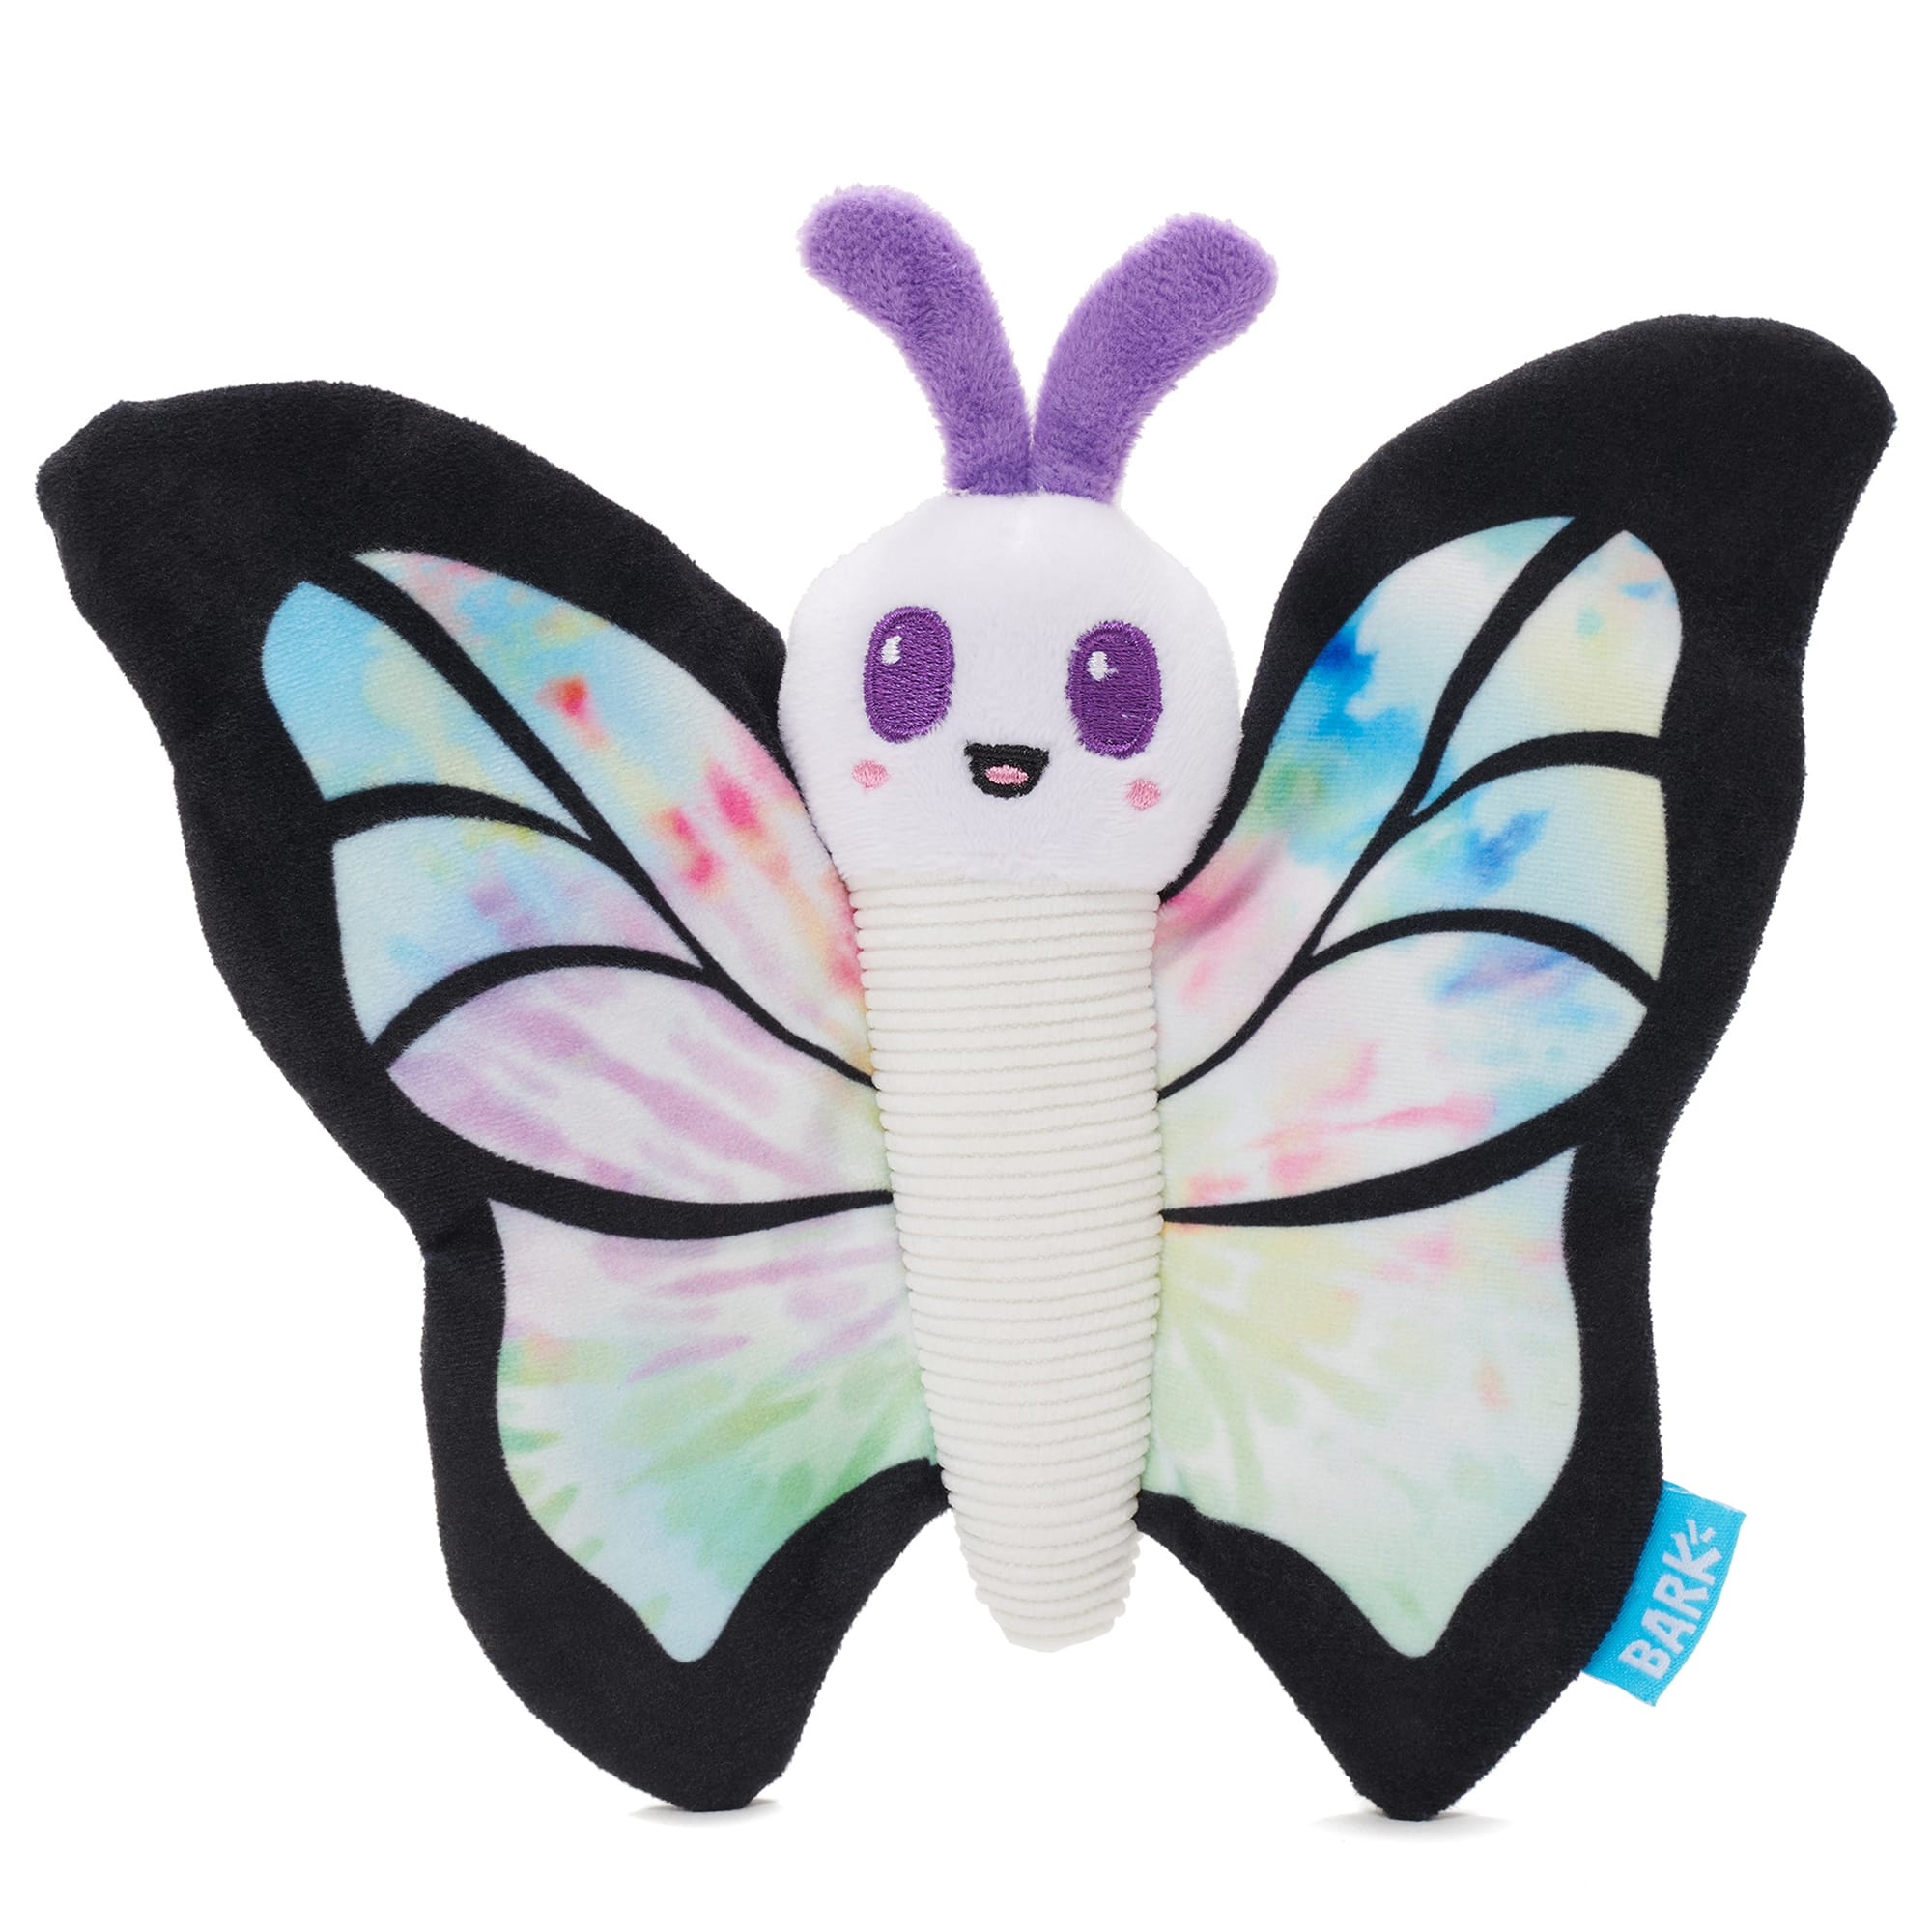 BARK Fly High Tie-Dye Butterfly Dog Toy, Small | Petco